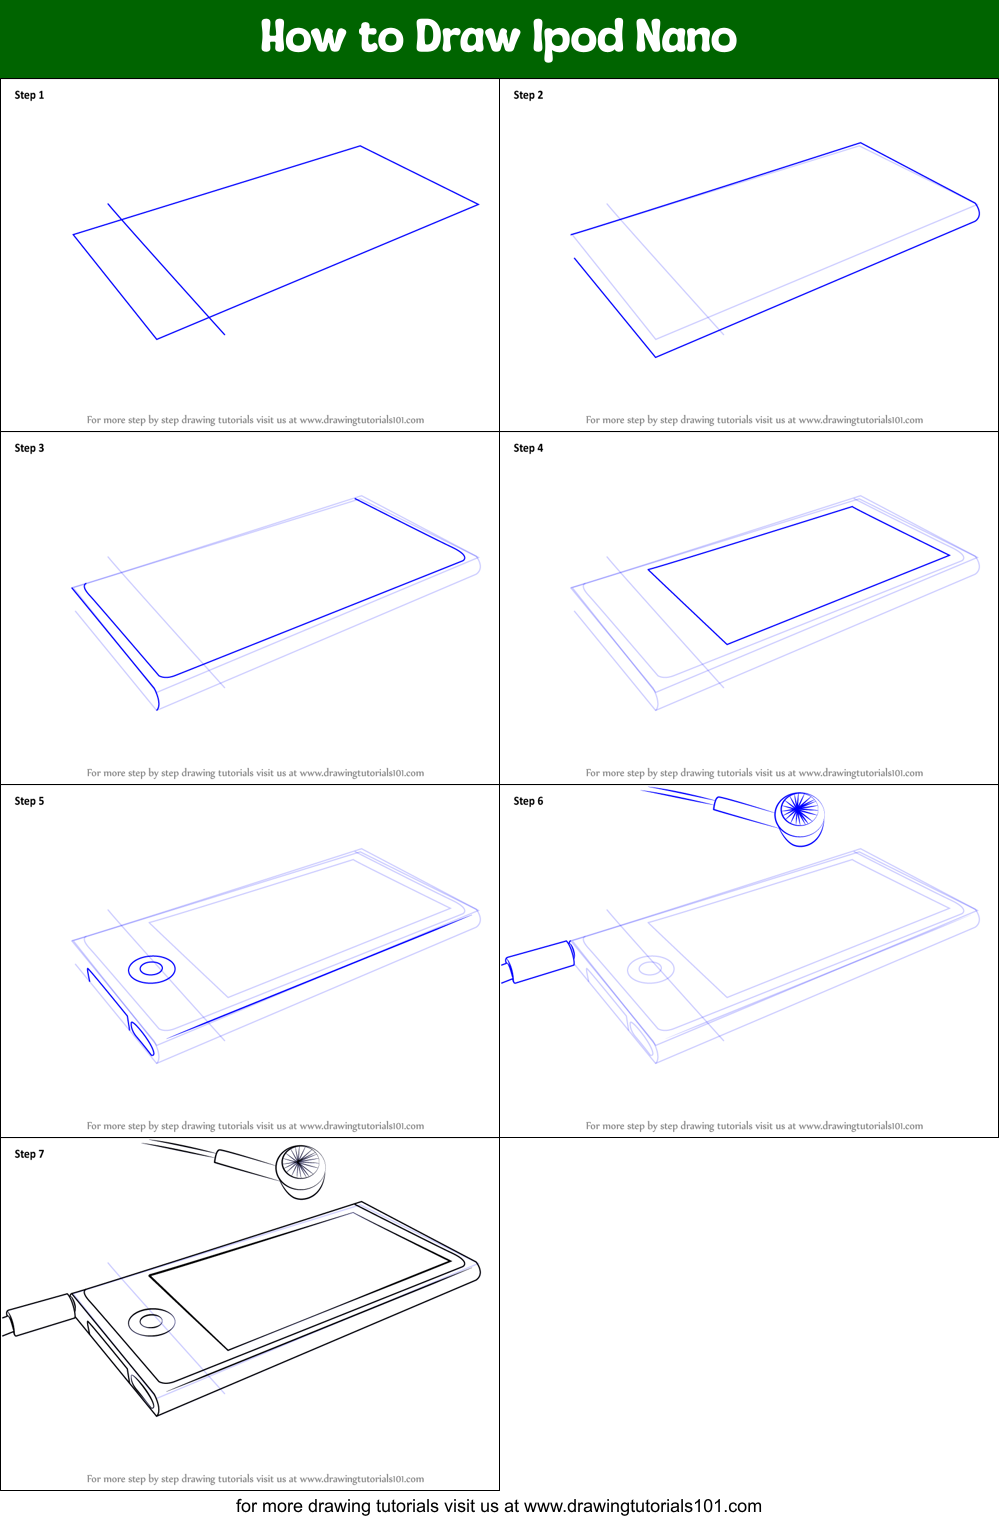 How to Draw Ipod Nano printable step by step drawing sheet